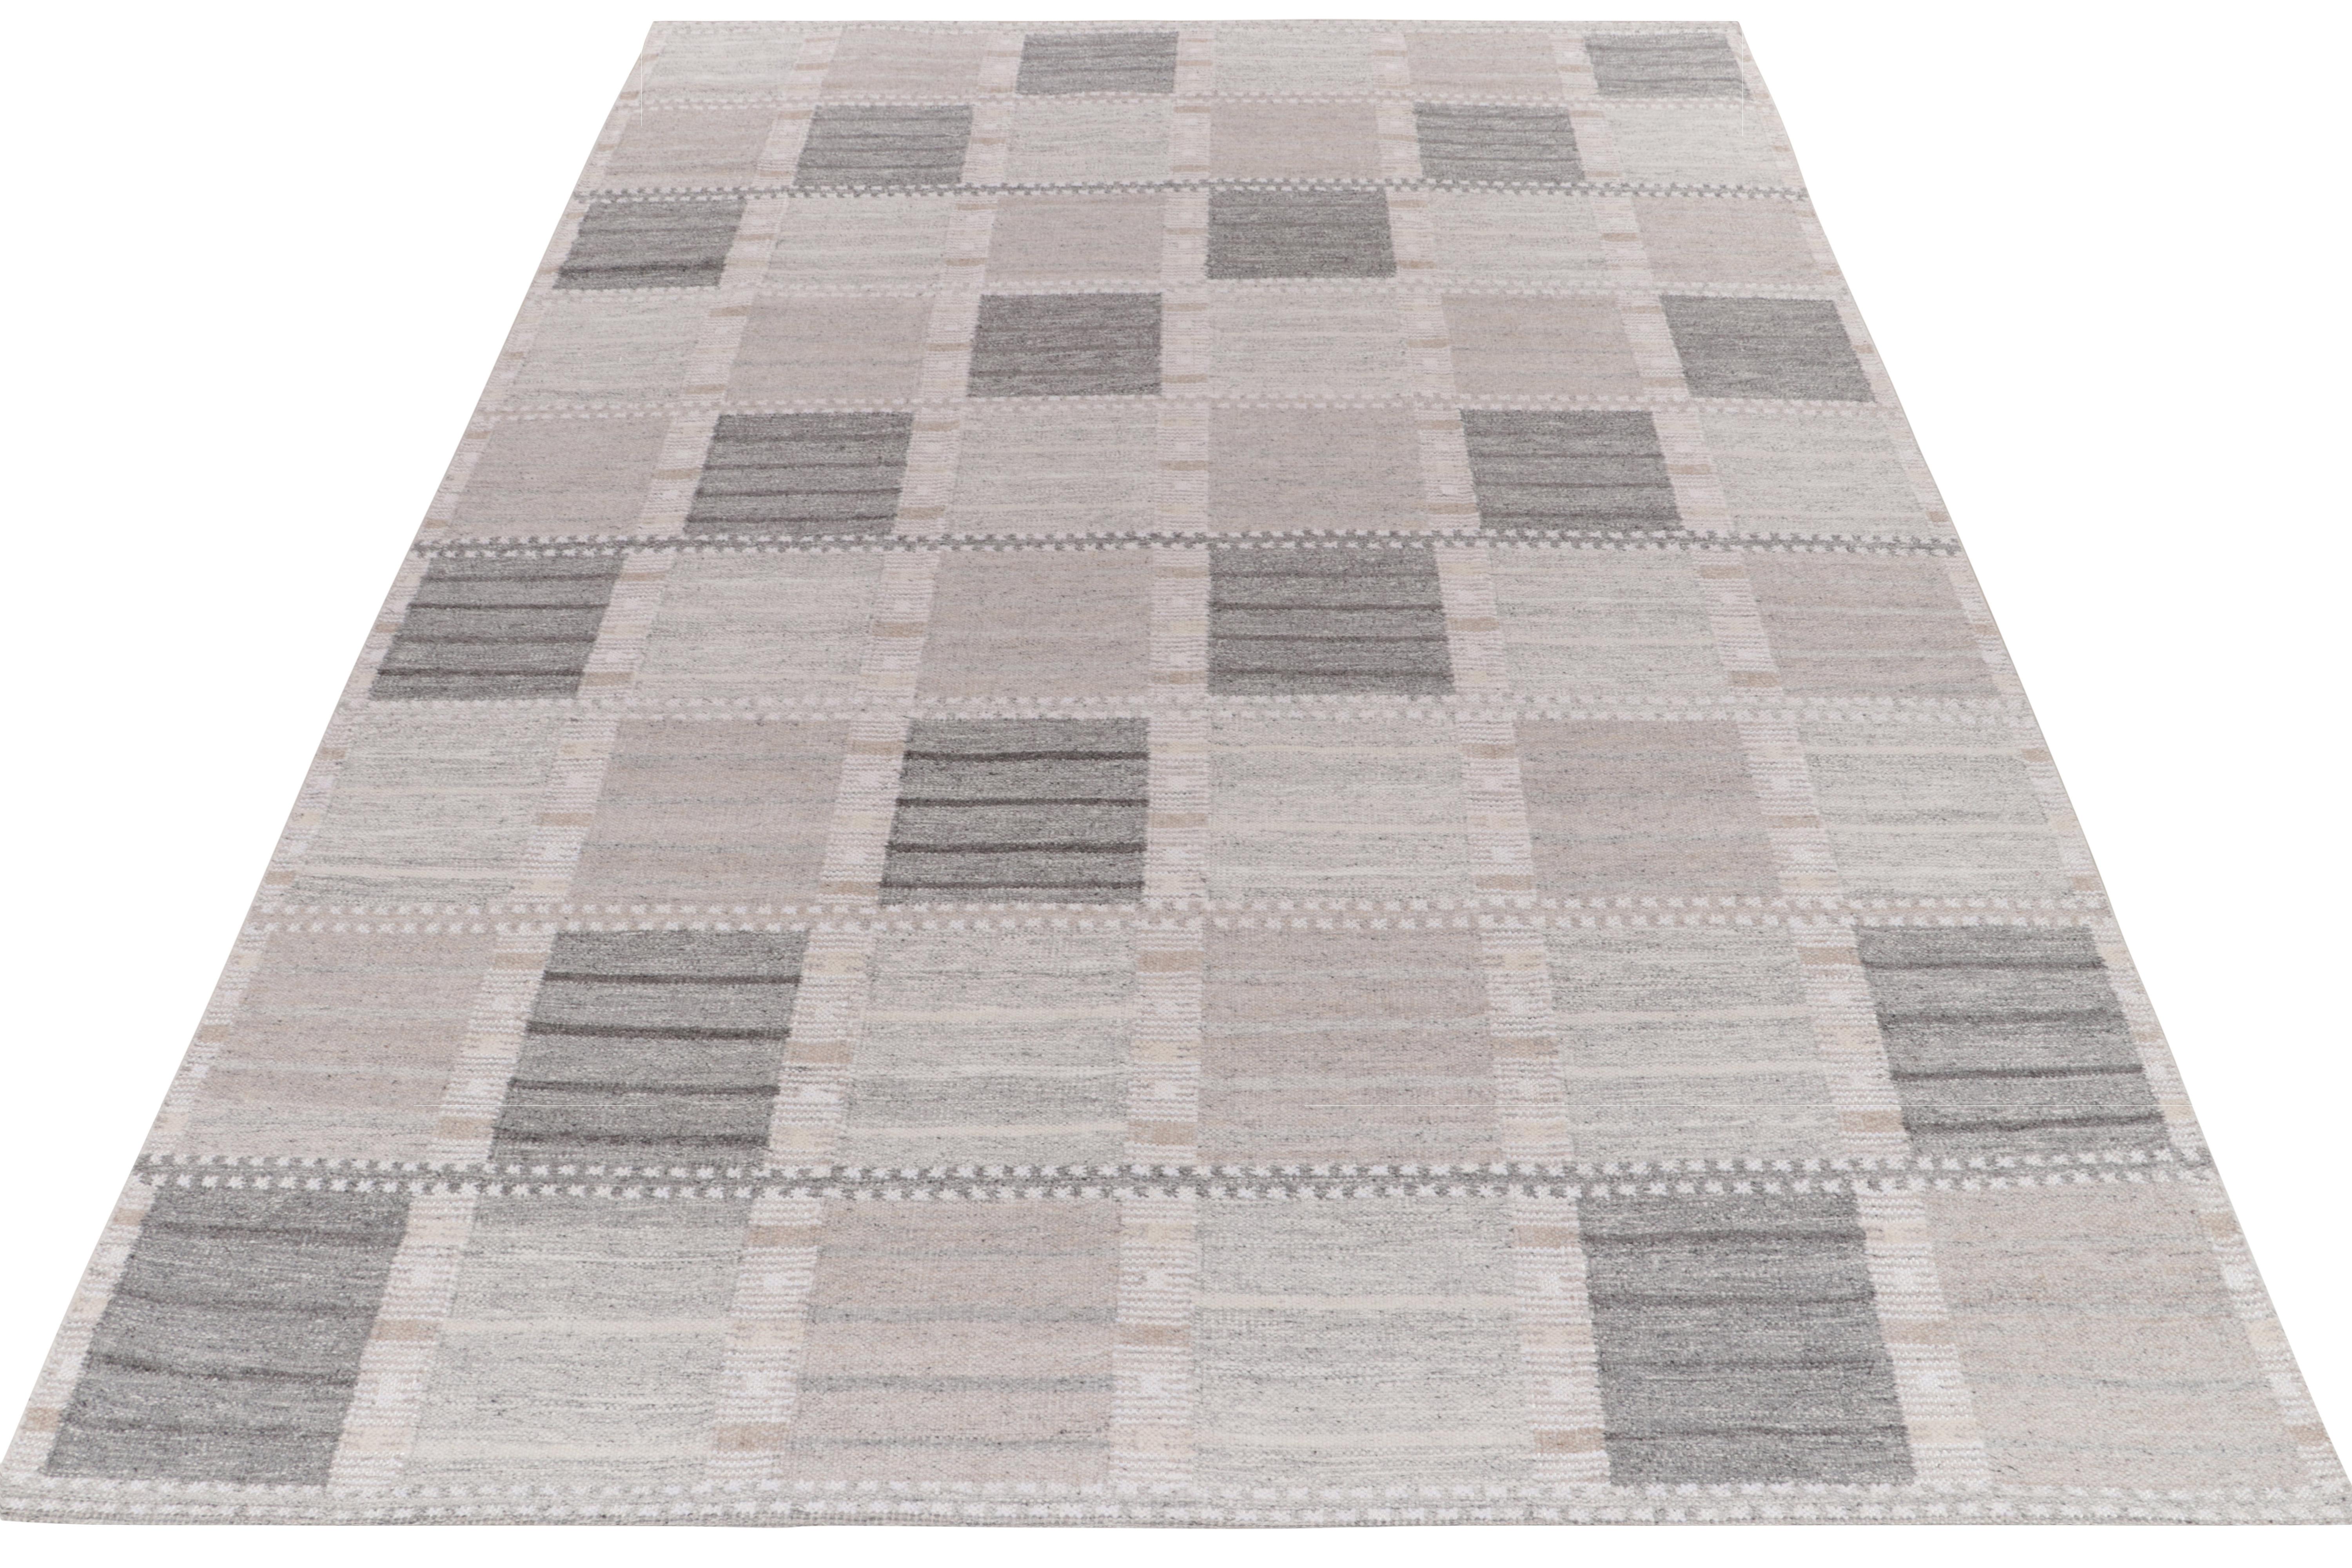 Exemplifying a contemporary take on Swedish Deco aesthetics, a 10x14 flat weave from Rug & Kilim’s award-winning Scandinavian collection. The handwoven rug enjoys a smart application of geometry with well-defined compartmentalisation in stone blue &